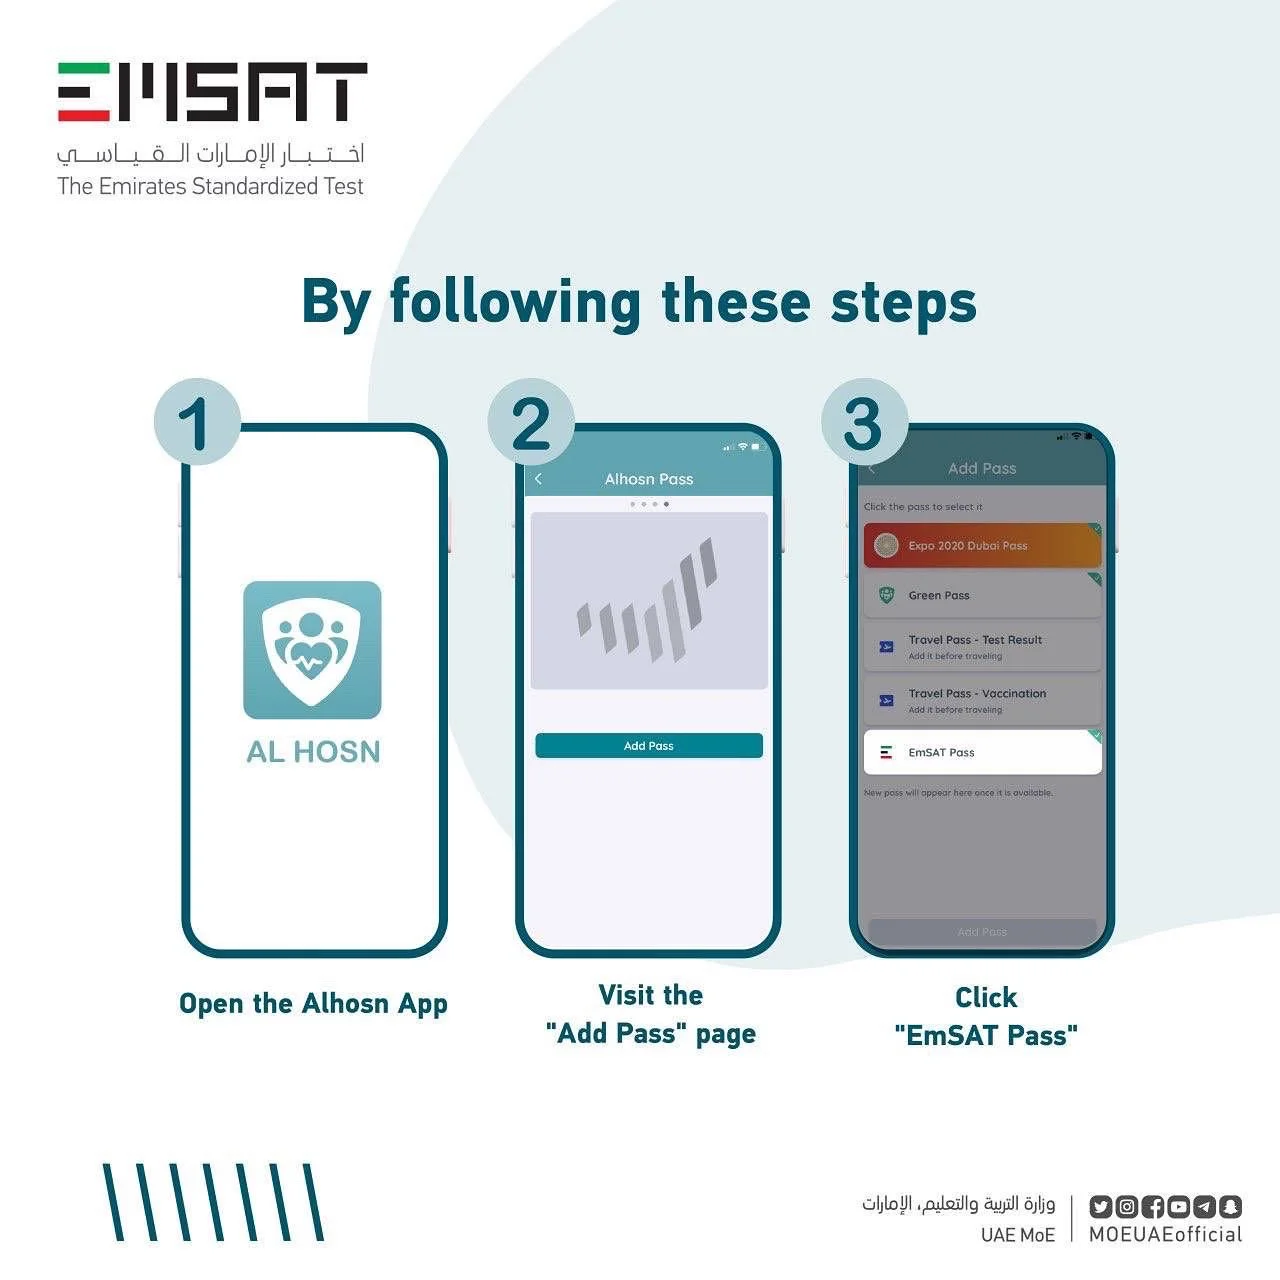 EmSAT Pass is provided by the UAE Ministry of Education in collaboration with "Al Hosn App" to help the UAE's efforts to make it easier and safer for applicants to access test halls